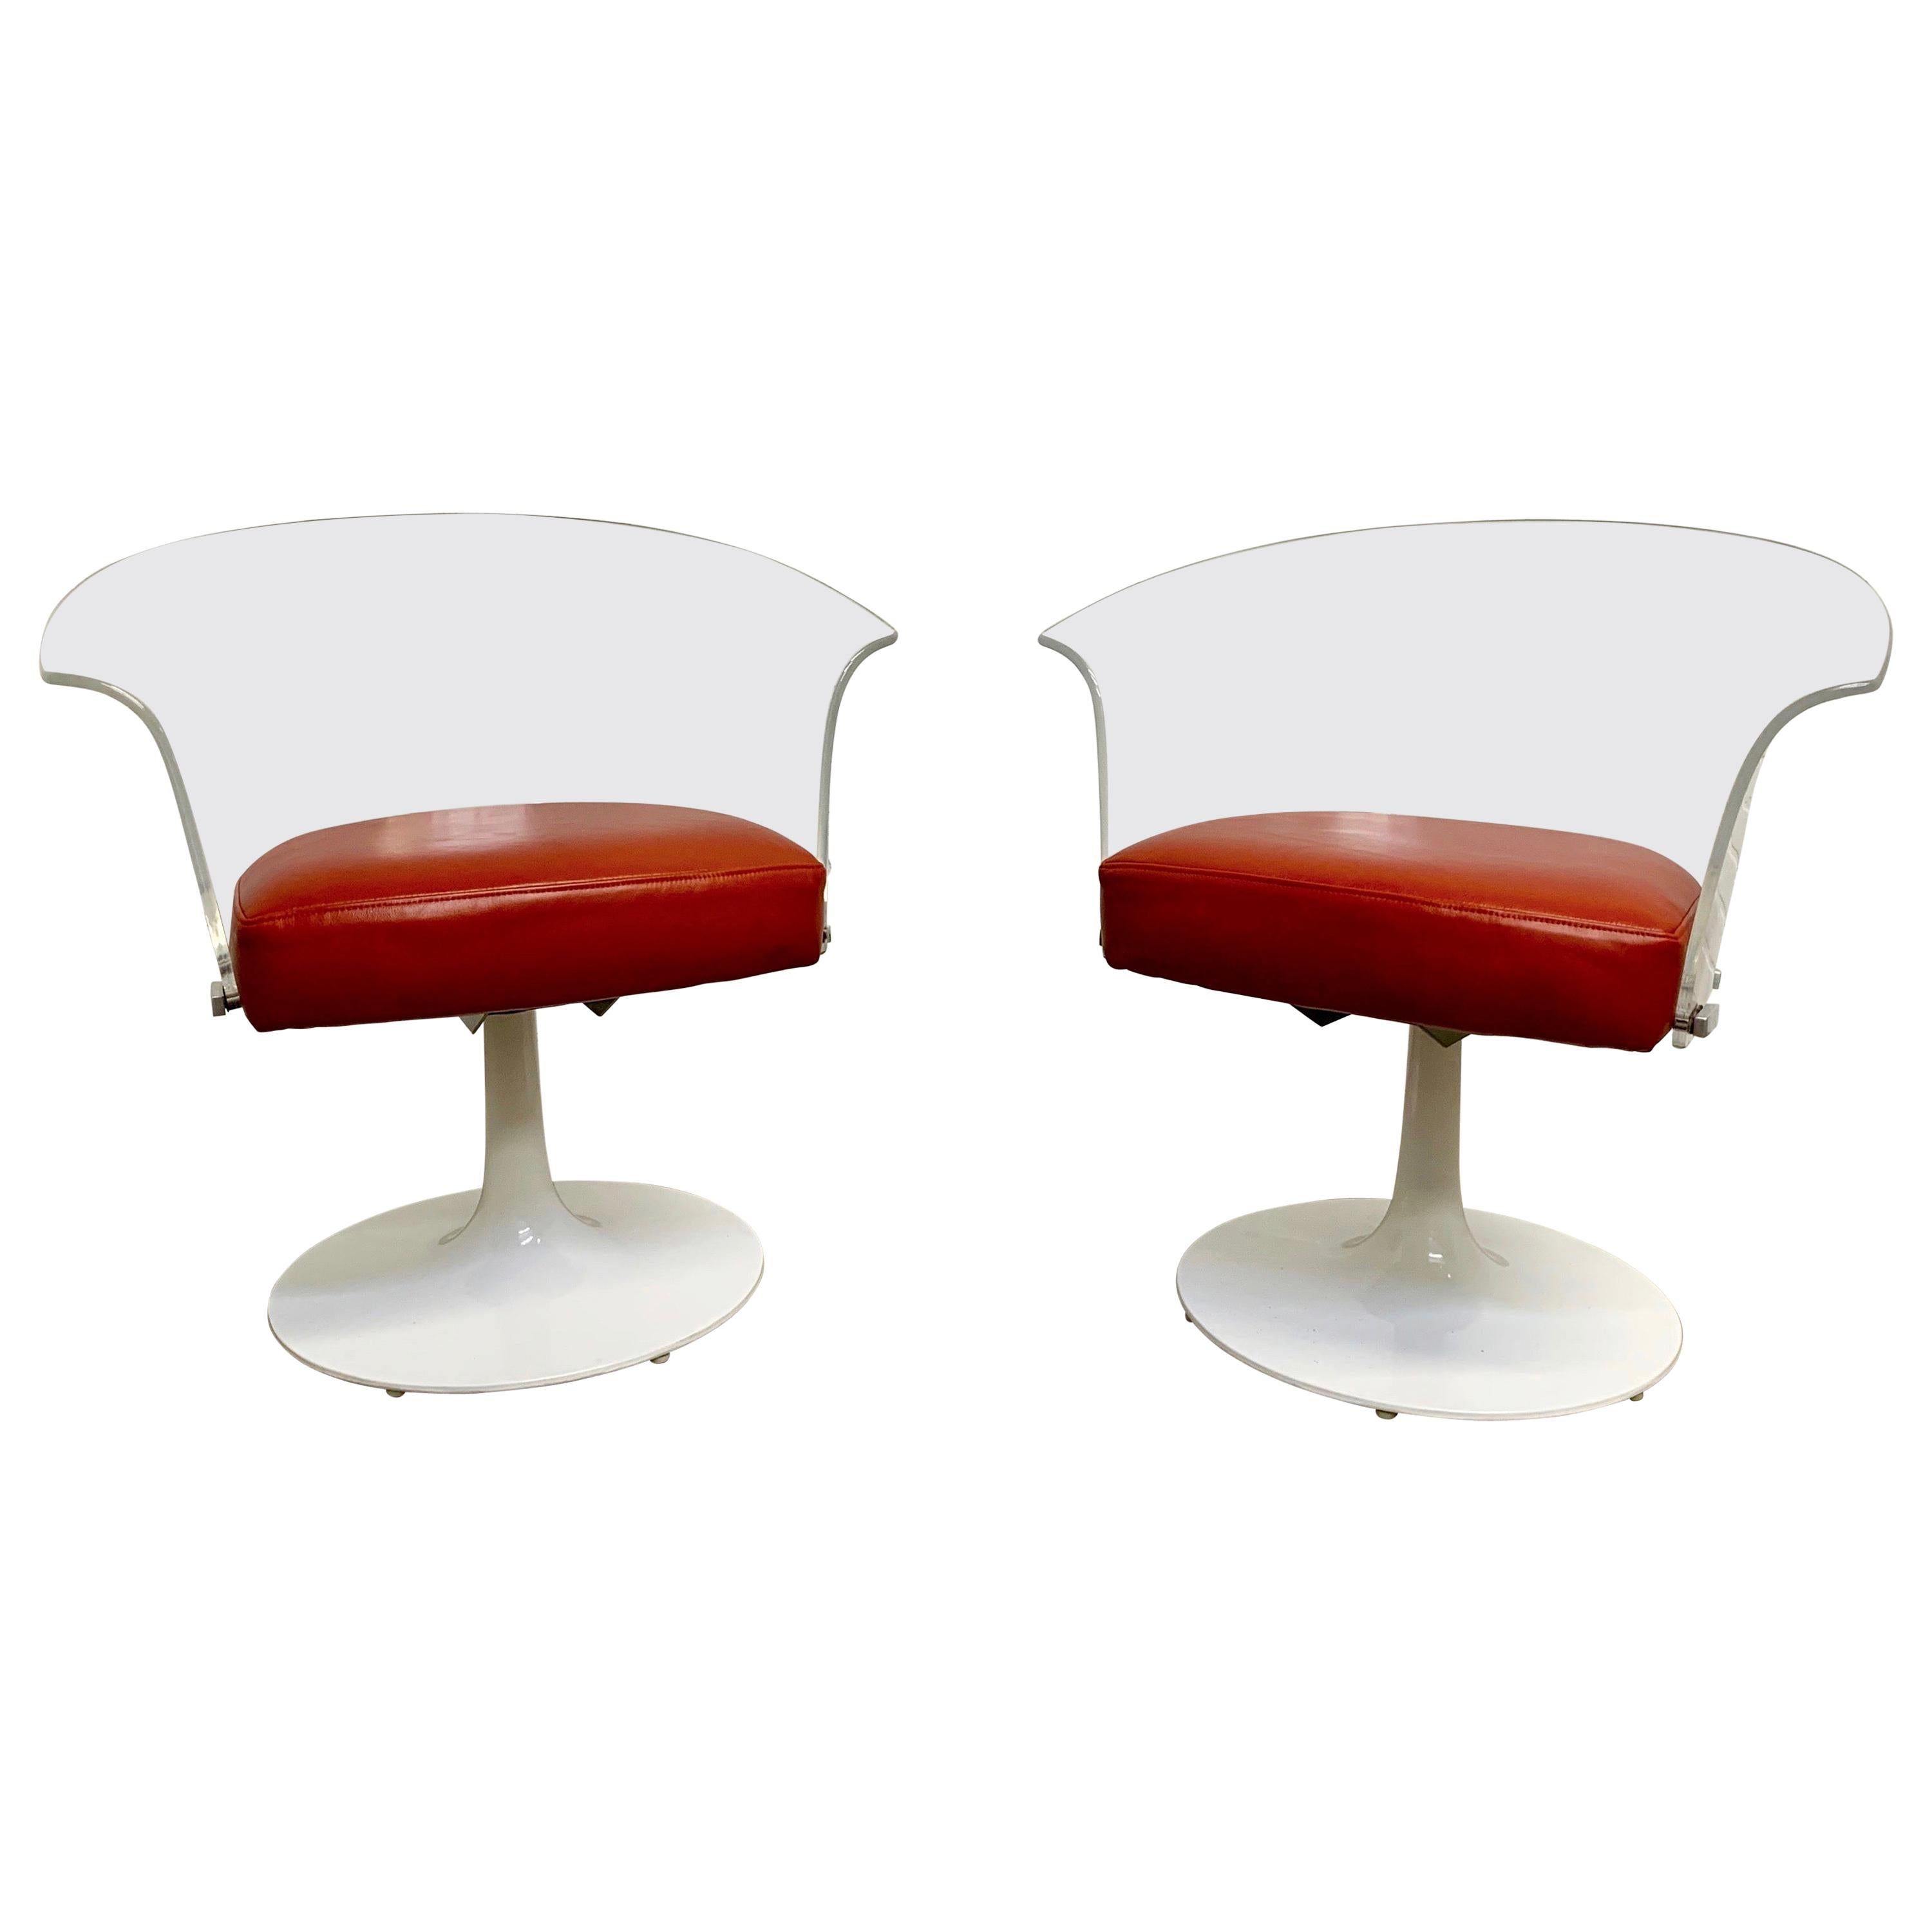 Lucite and Leather Space Age Chairs